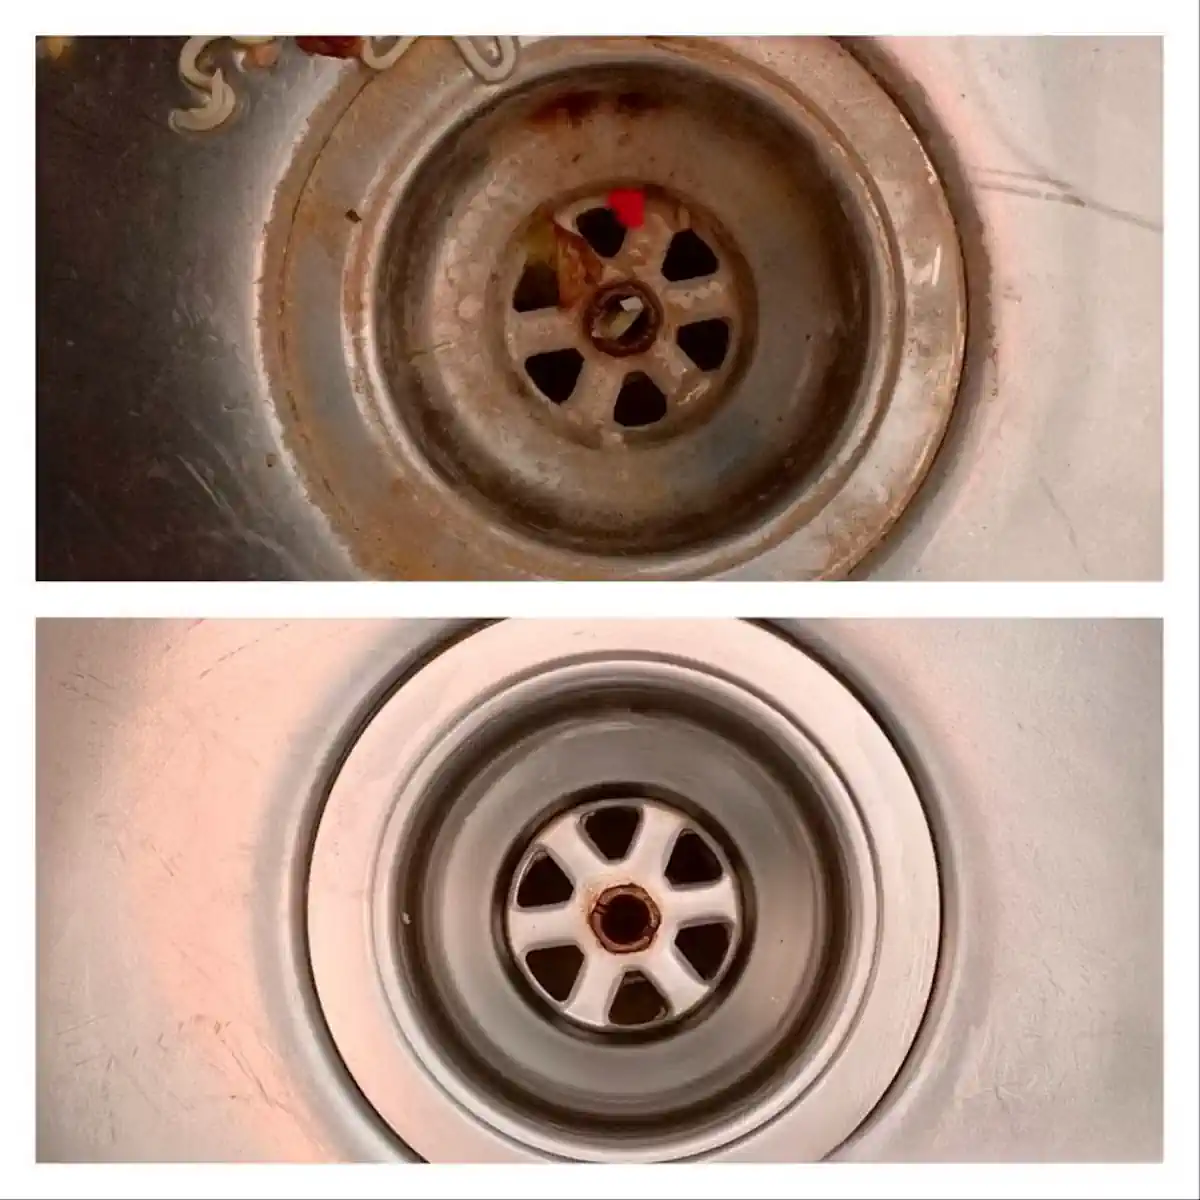 Clean sink drain - Before and after